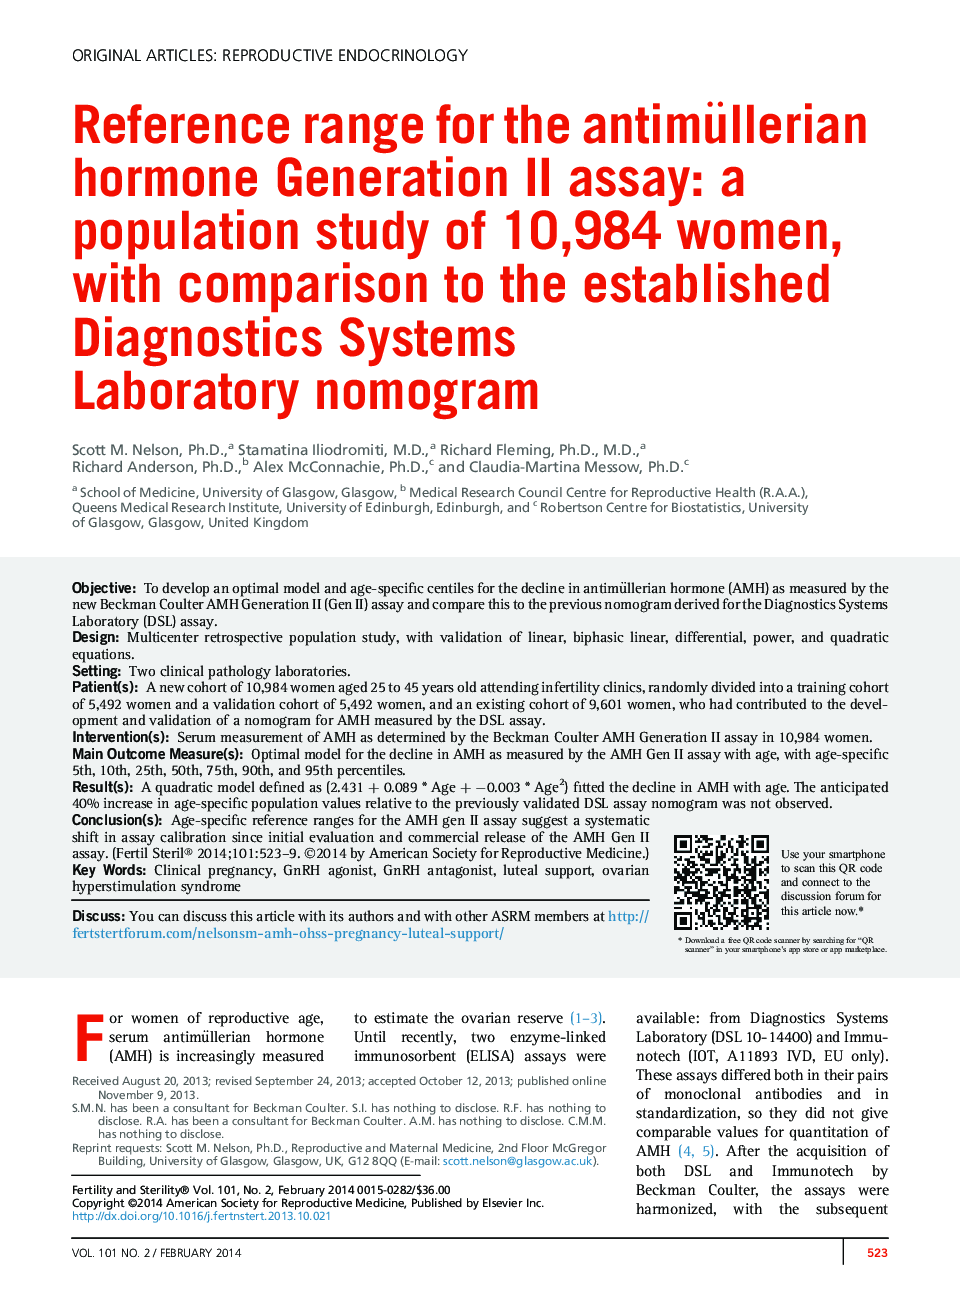 Reference range for the antimüllerian hormone Generation II assay: a population study of 10,984 women, with comparison to the established Diagnostics Systems Laboratory nomogram